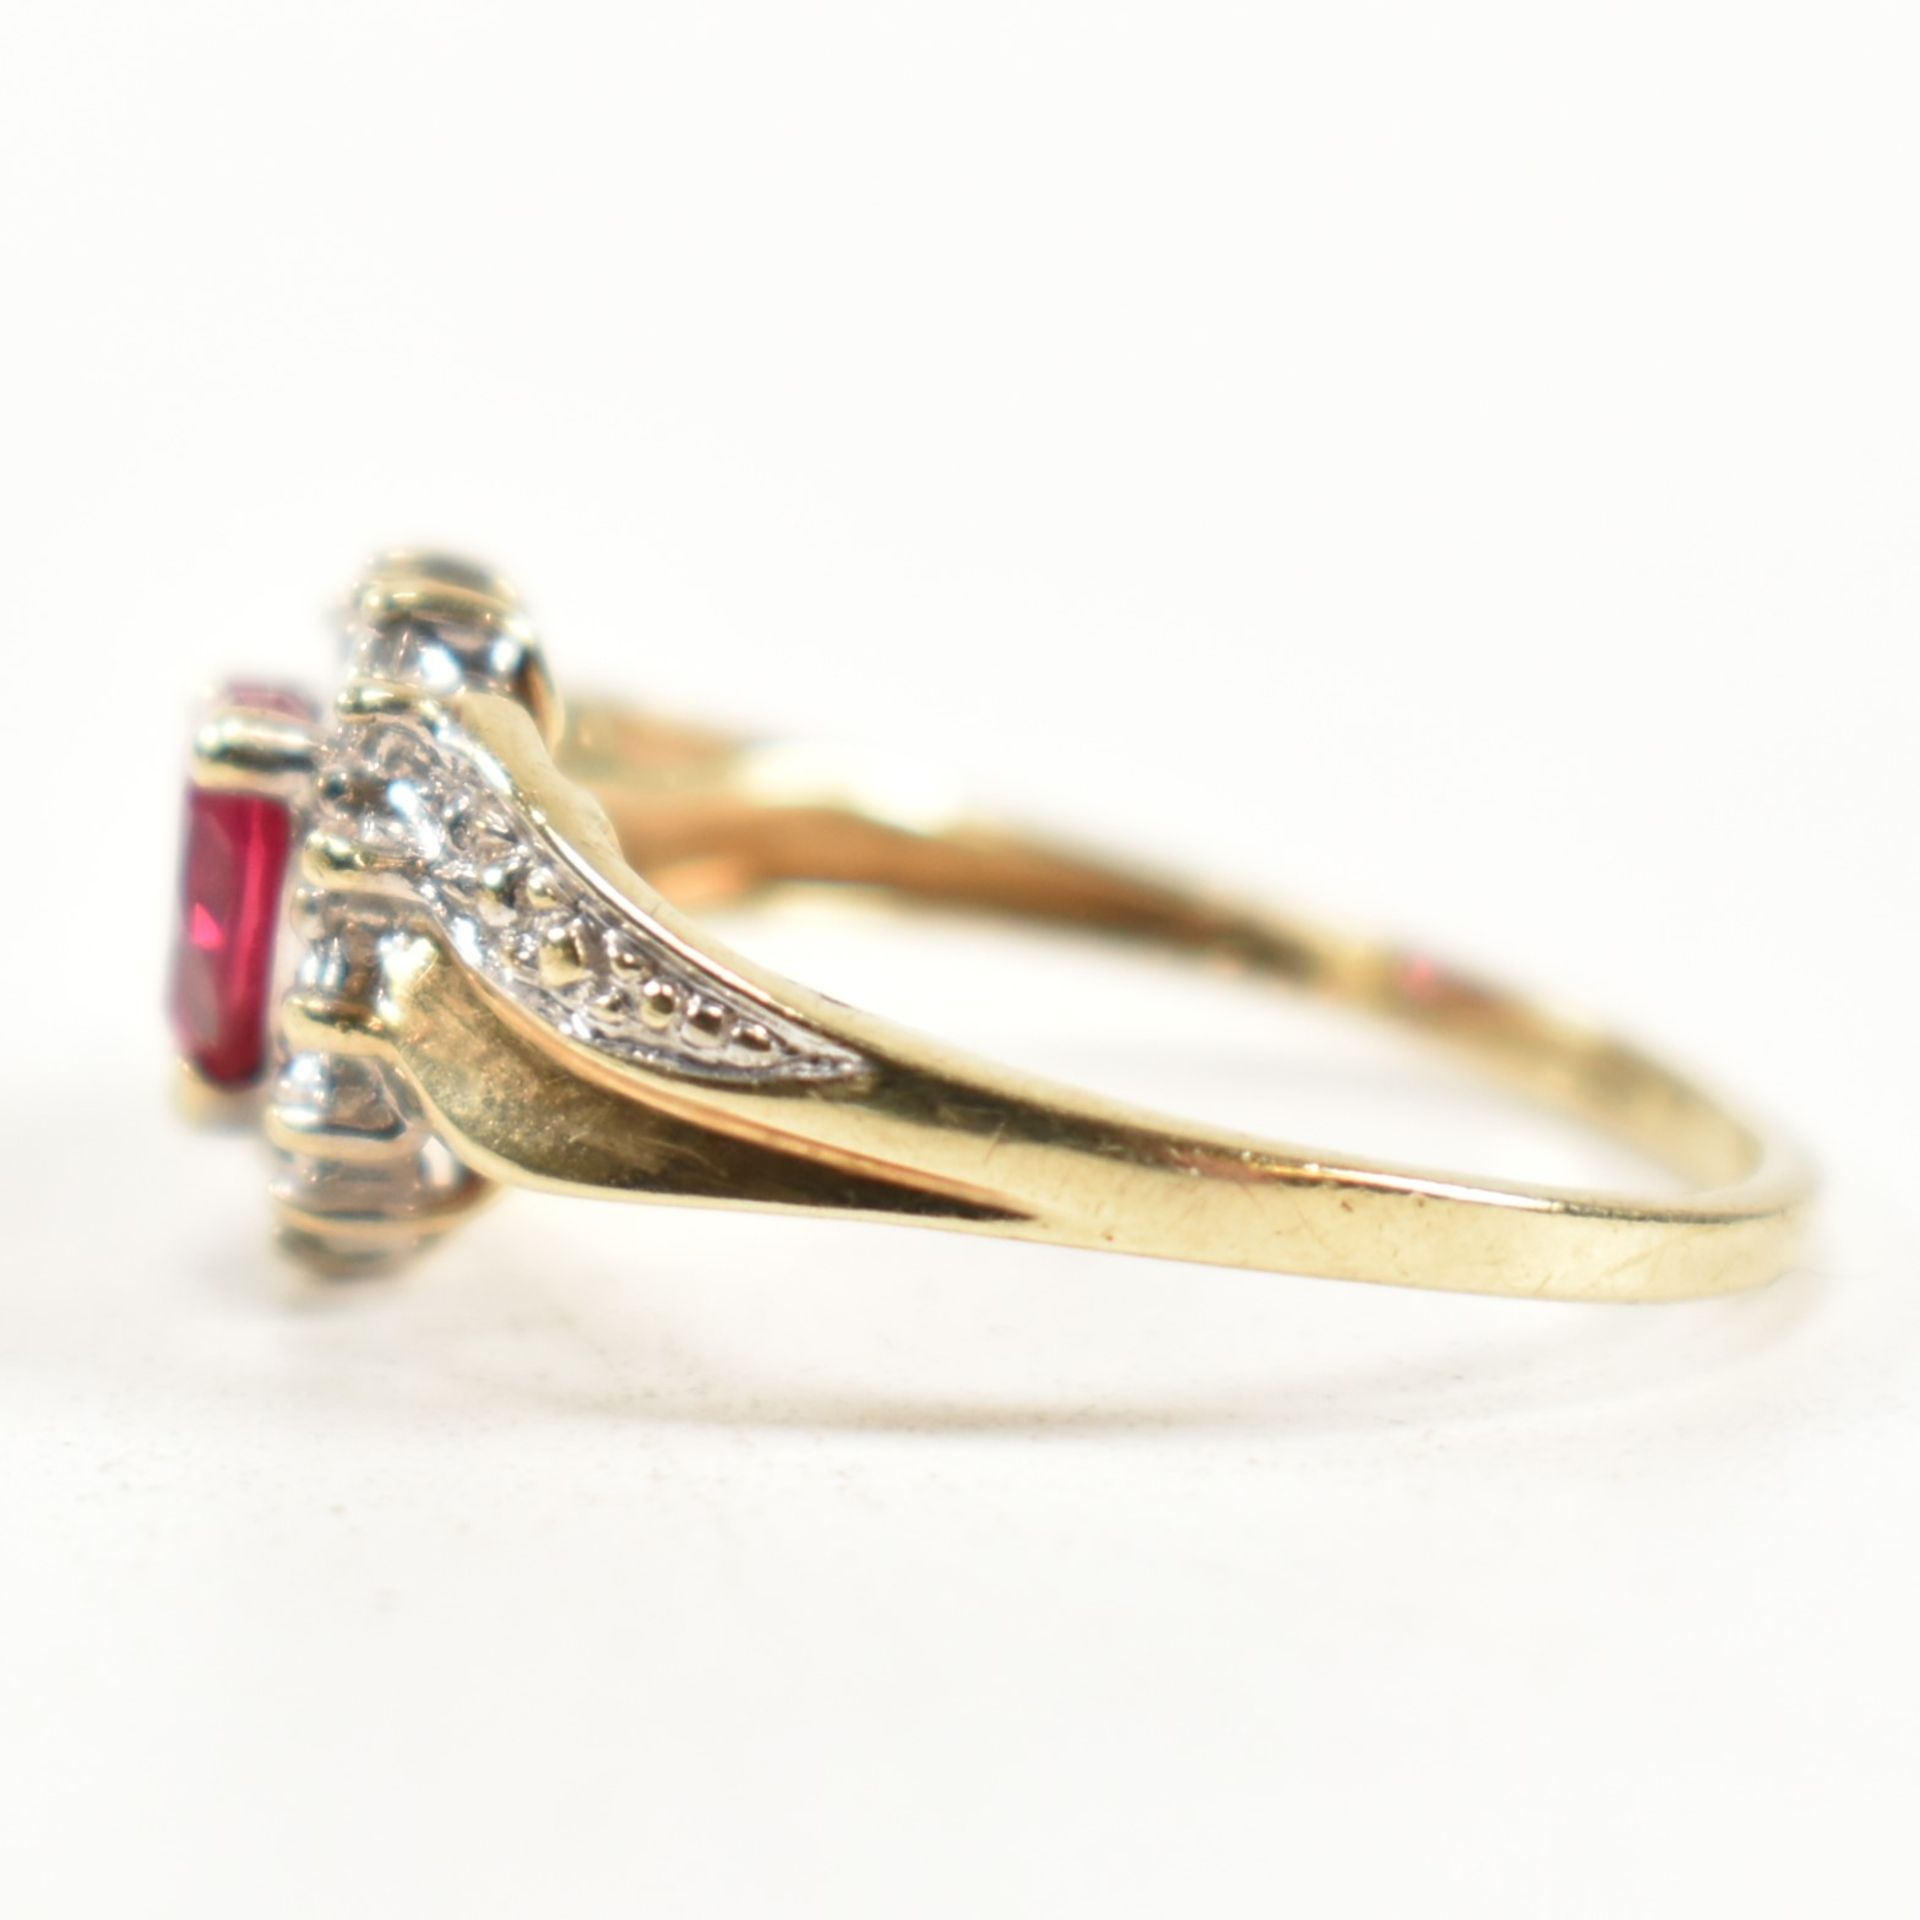 HALLMARKED 9CT GOLD DIAMOND & RUBY CLUSTER RING - Image 6 of 10